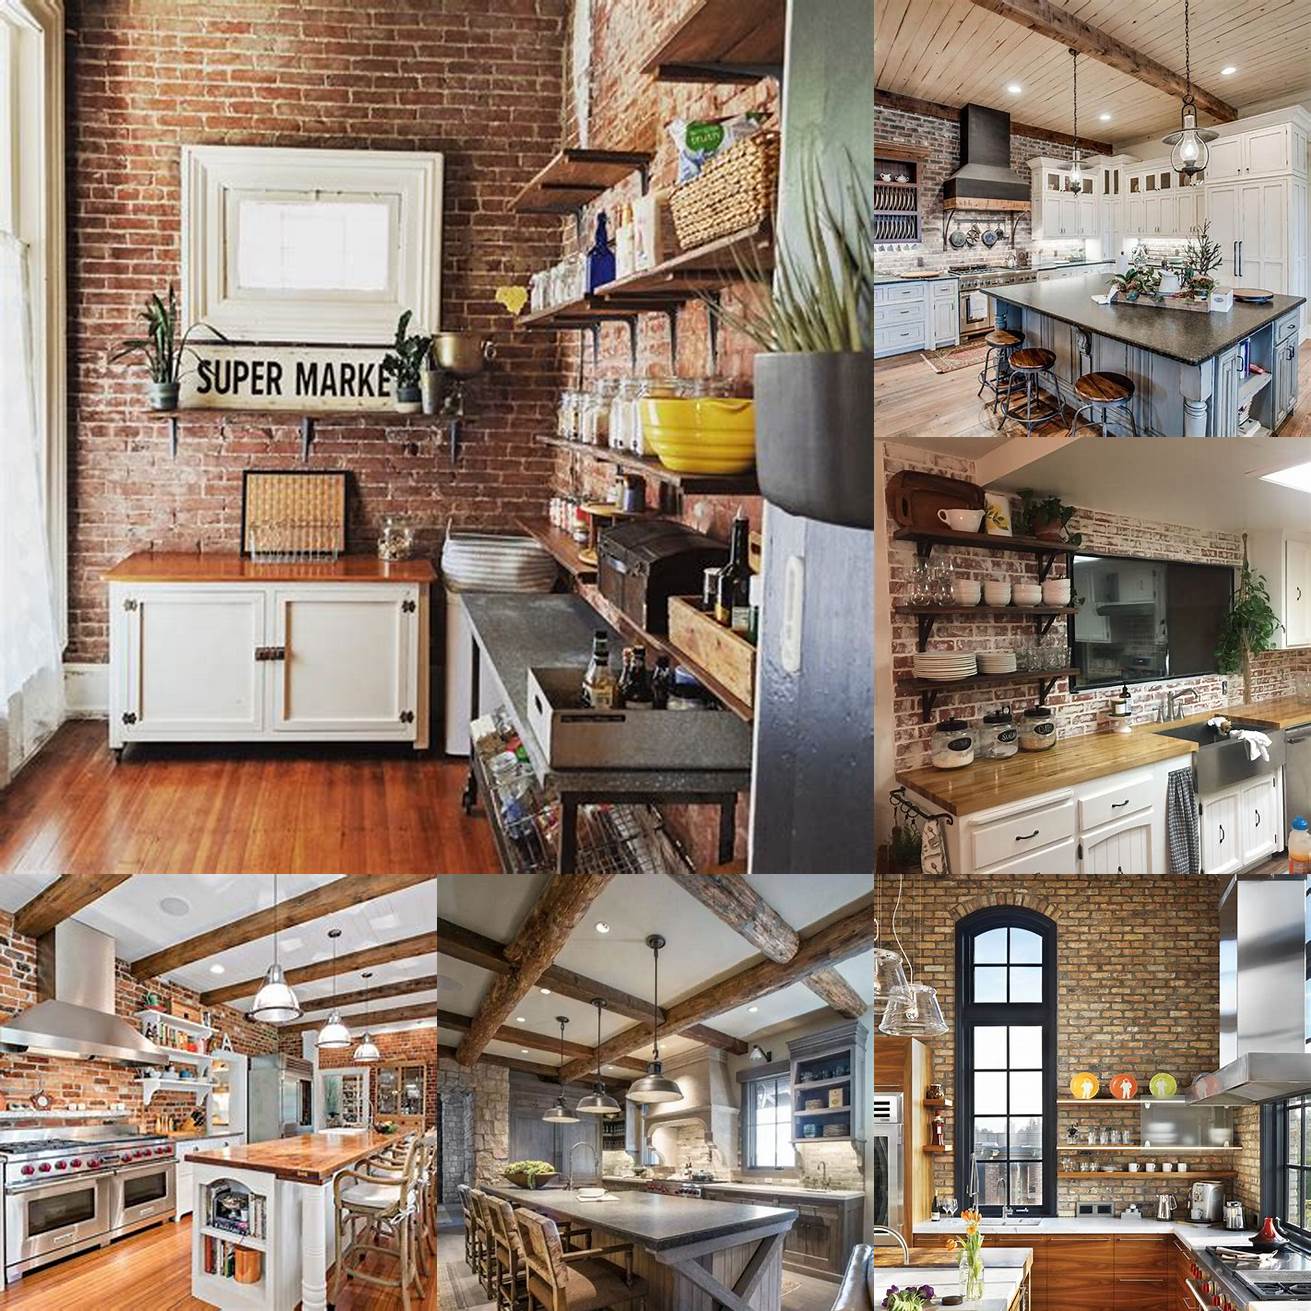 2 A rustic open concept kitchen with exposed brick walls and a farmhouse sink